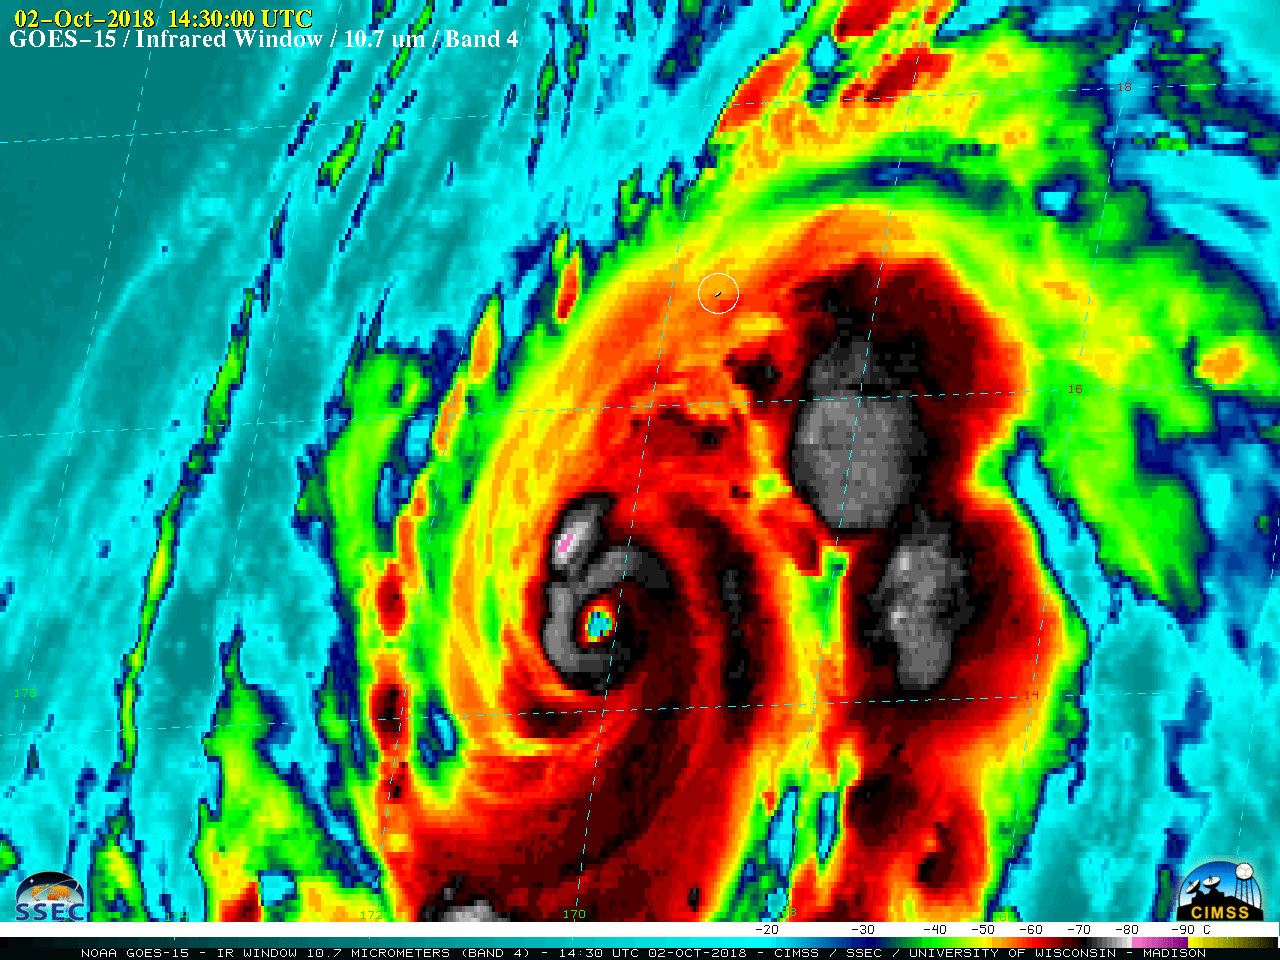 GOES-15 Infrared Window (10.7 µm) images; the white circle shows the location of Johnston Atoll [click to play animation | MP4]